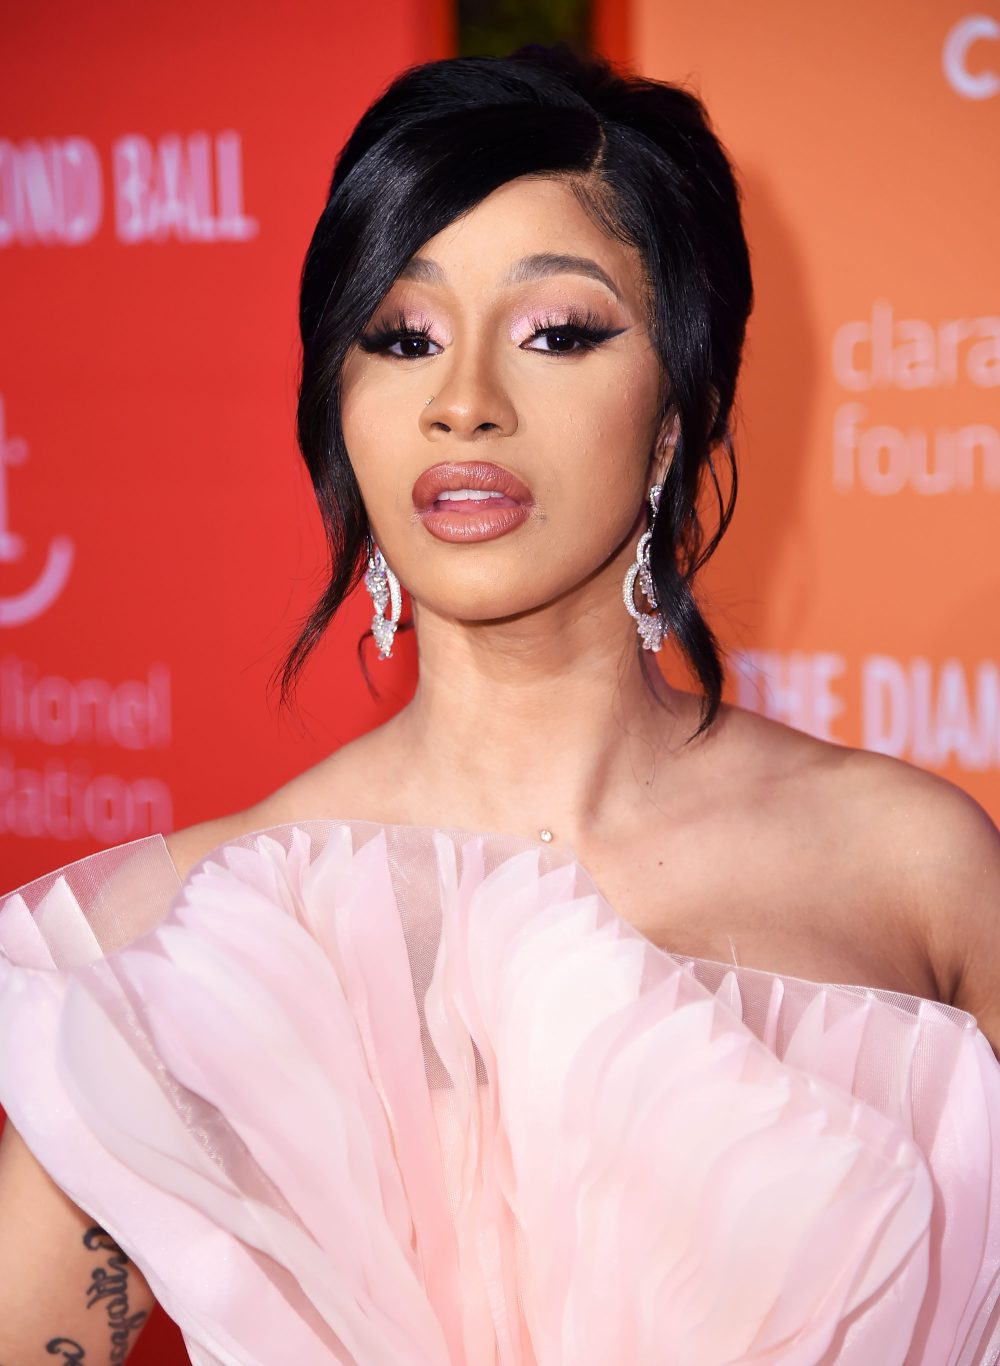 Cardi B Attempts to Get a Bikini Wax During Quarantine: 'Today Is Pain Day'